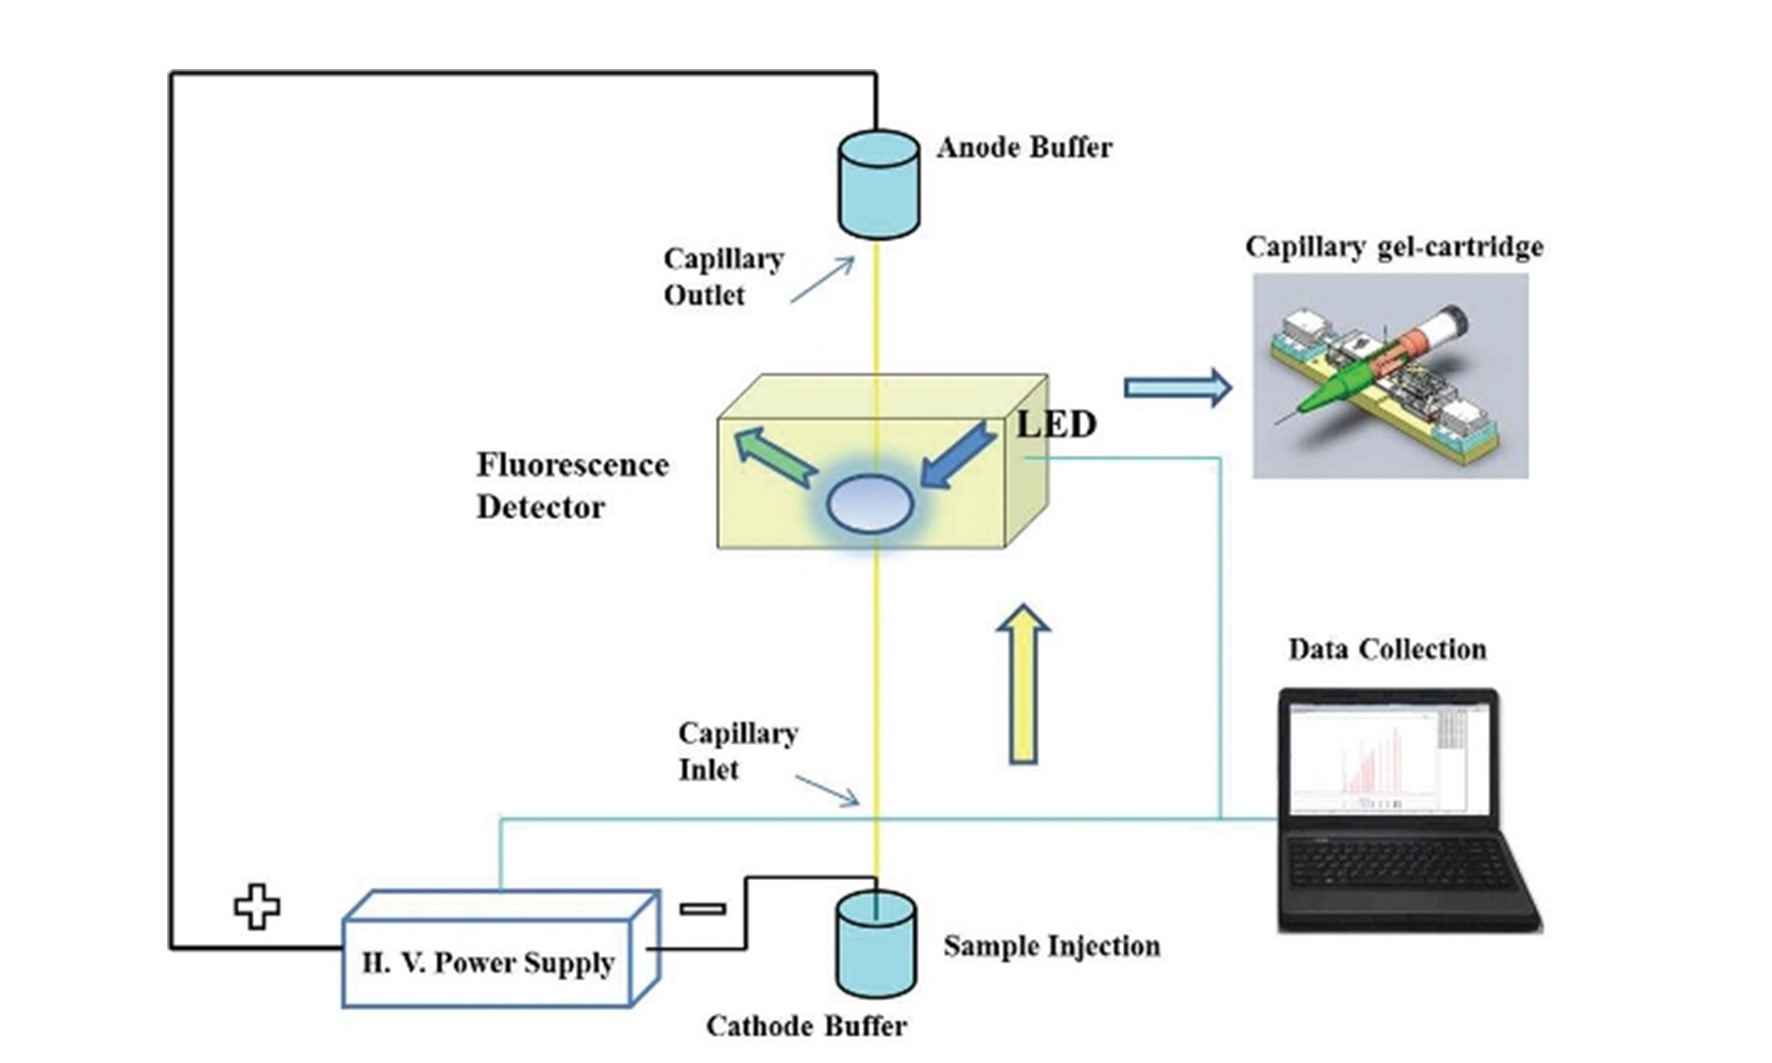 Use of a Pen-Shaped Capillary Gel Electrophoresis Cartridge for Cost-Effective DNA Fragment Analysis